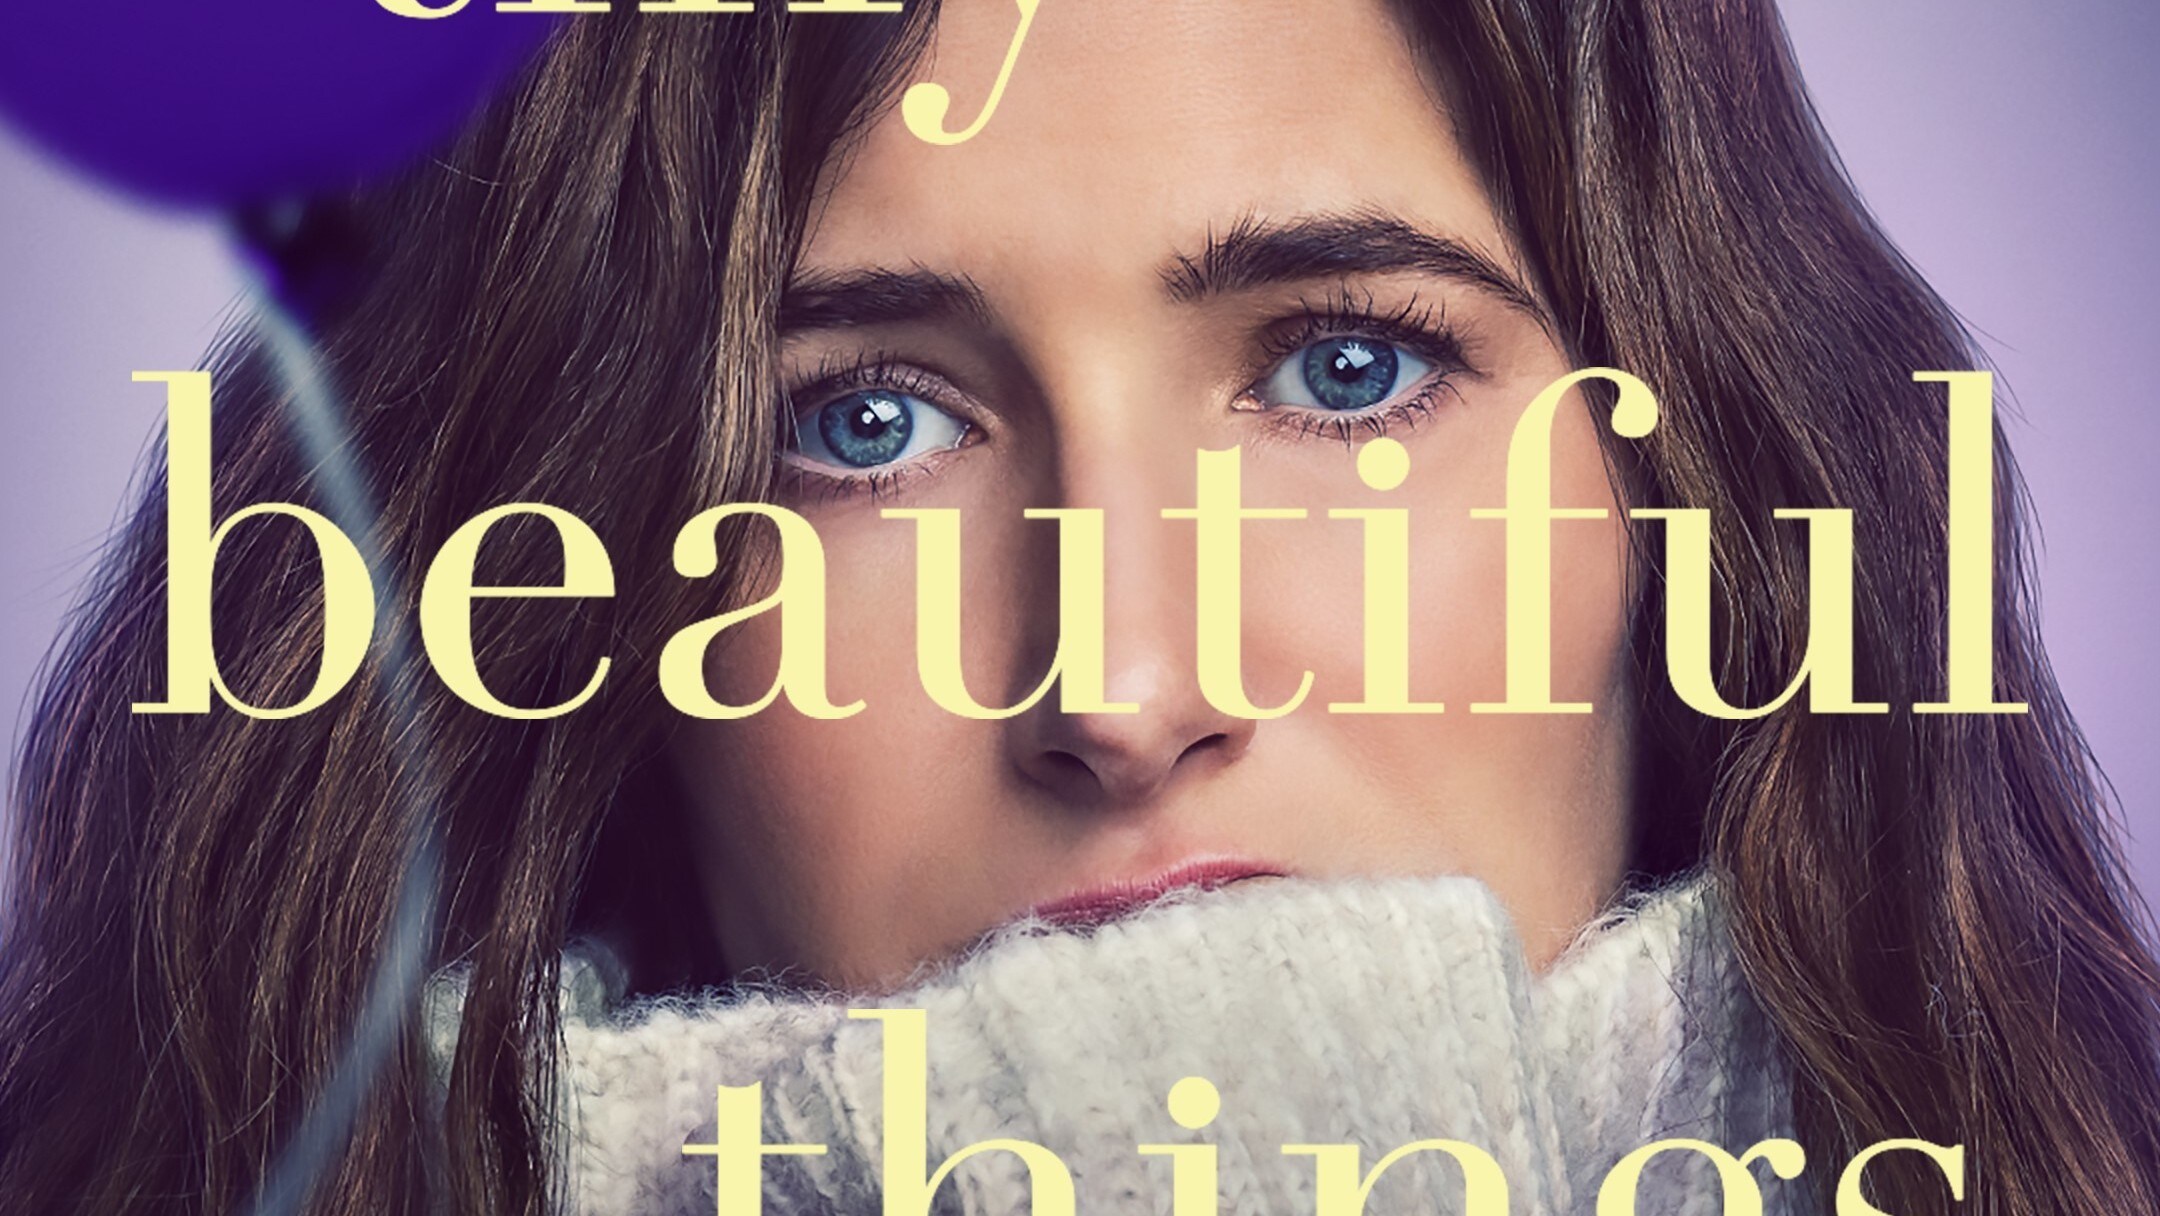 "TINY BEAUTIFUL THINGS" - PÓSTER Y TRÁILER YA DISPONIBLES